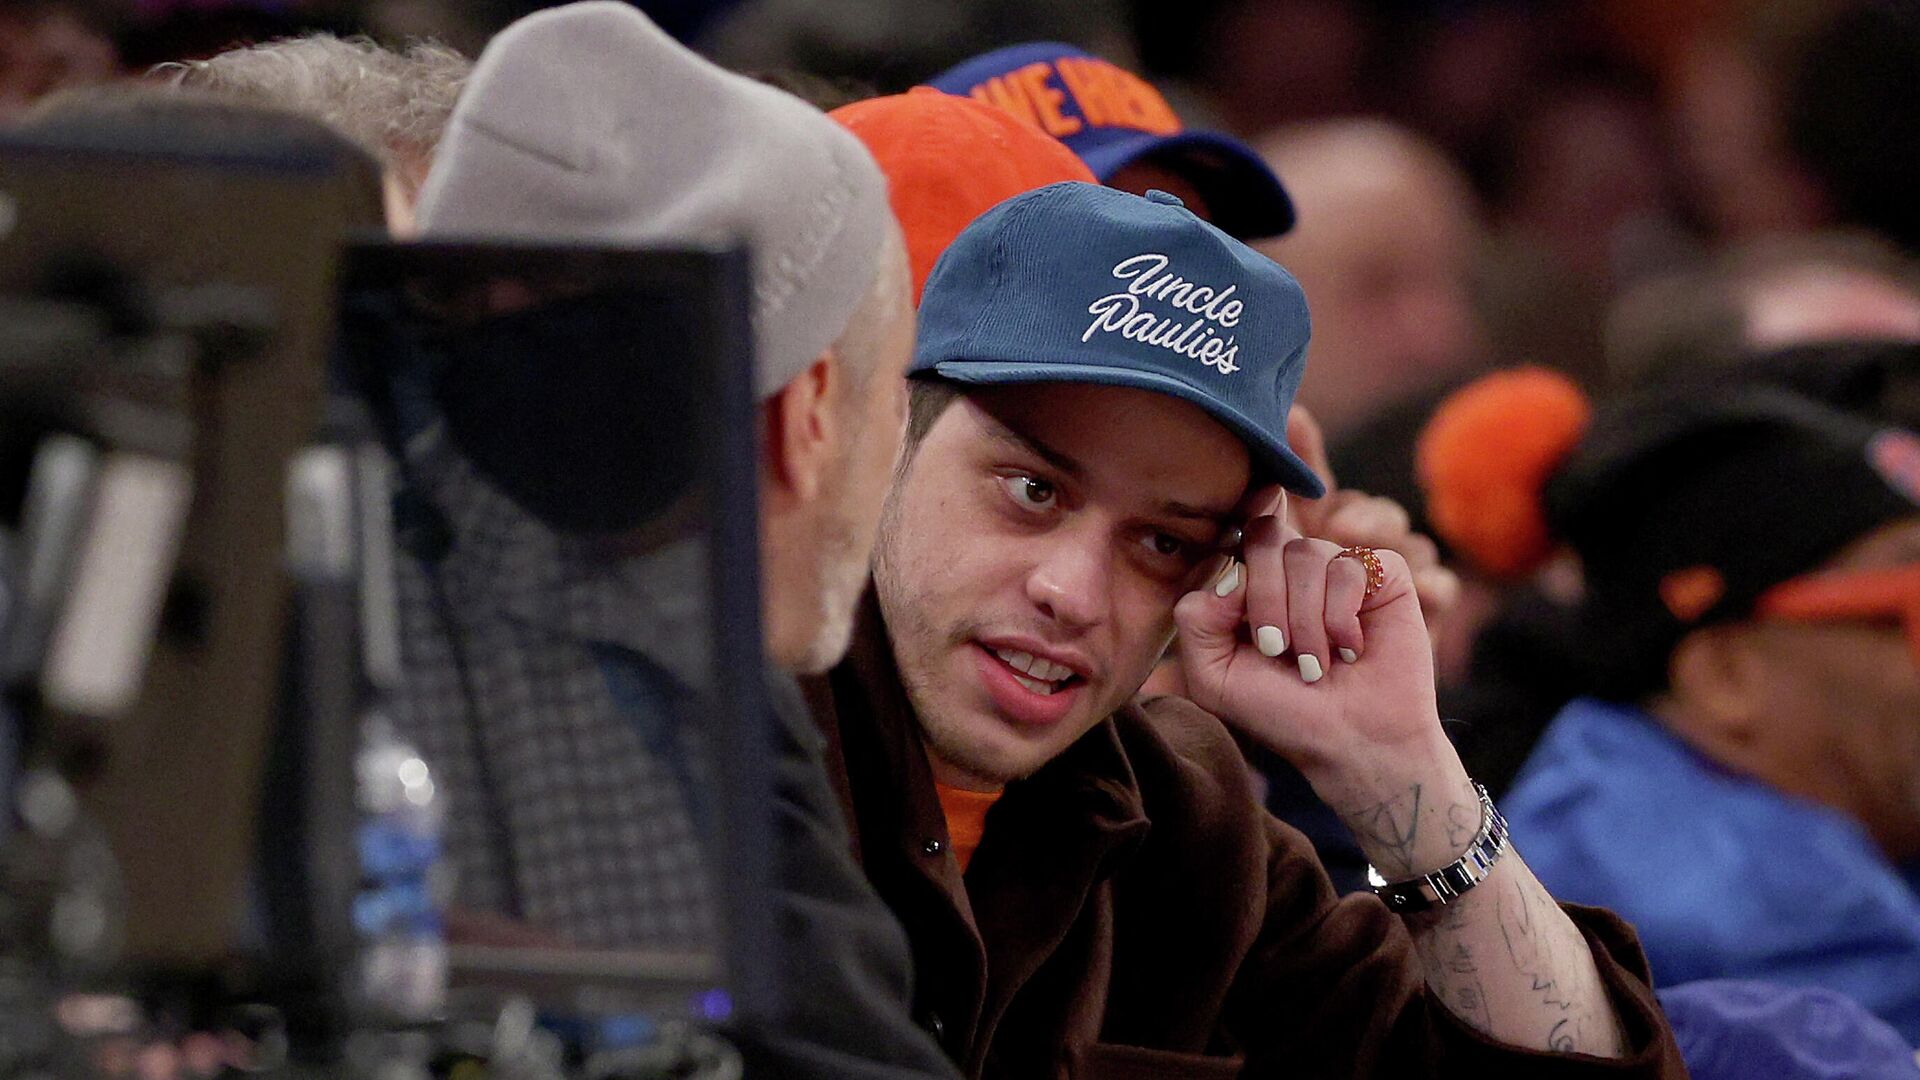 NEW YORK, NEW YORK - JANUARY 12: Actor and comedian Pete Davidson attends the game between the New York Knicks and the Dallas Mavericks at Madison Square Garden on January 12, 2022 in New York City.  - Sputnik International, 1920, 06.03.2022